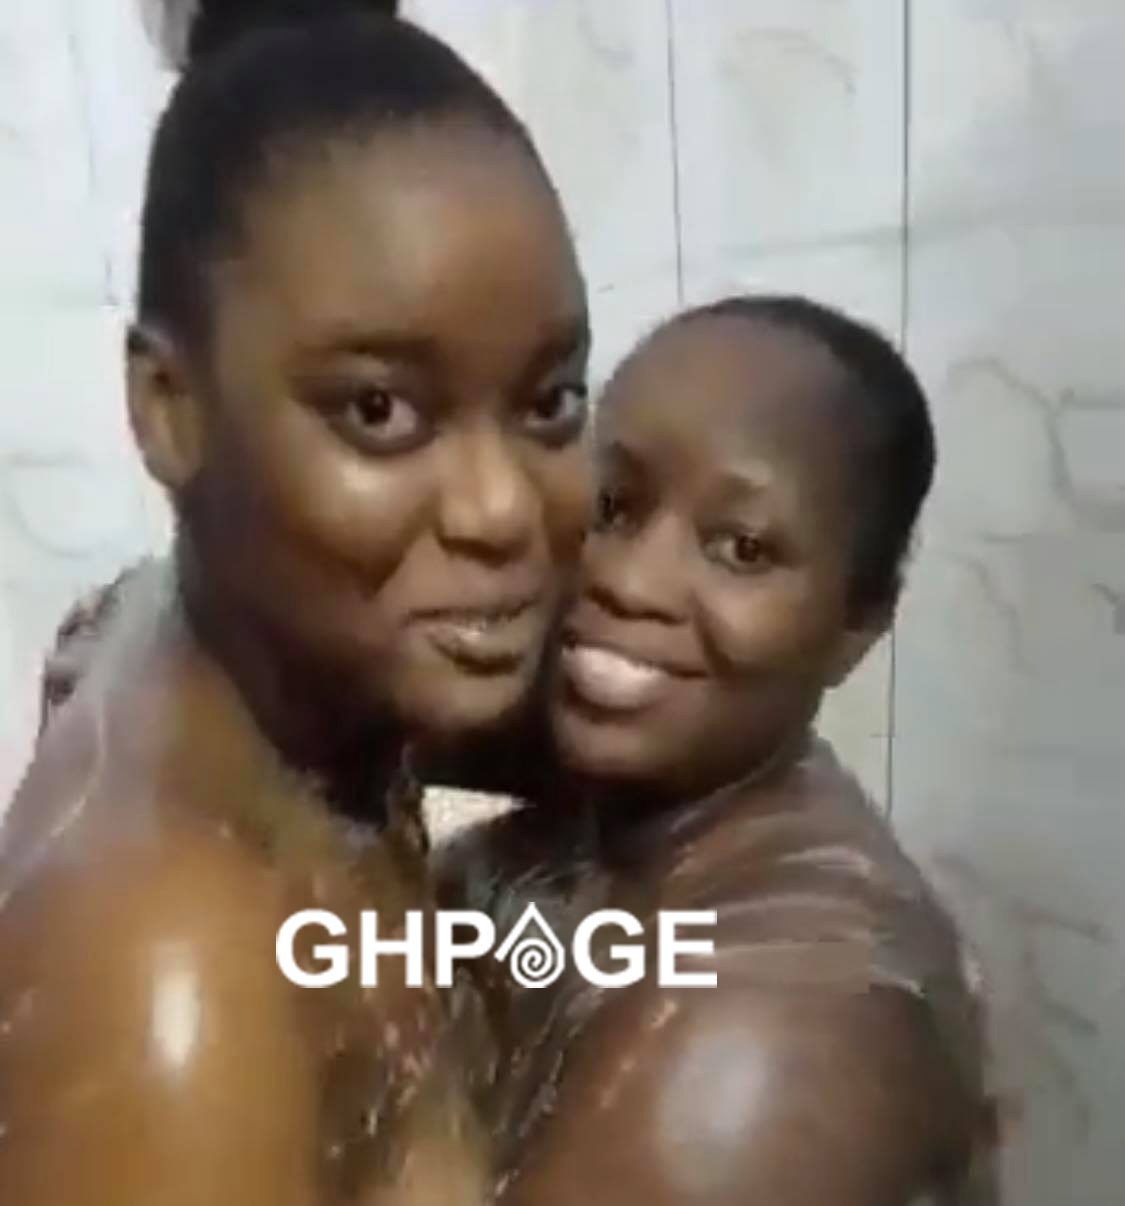 Bathroom video of Ghanaian lesbian soldiers who got married